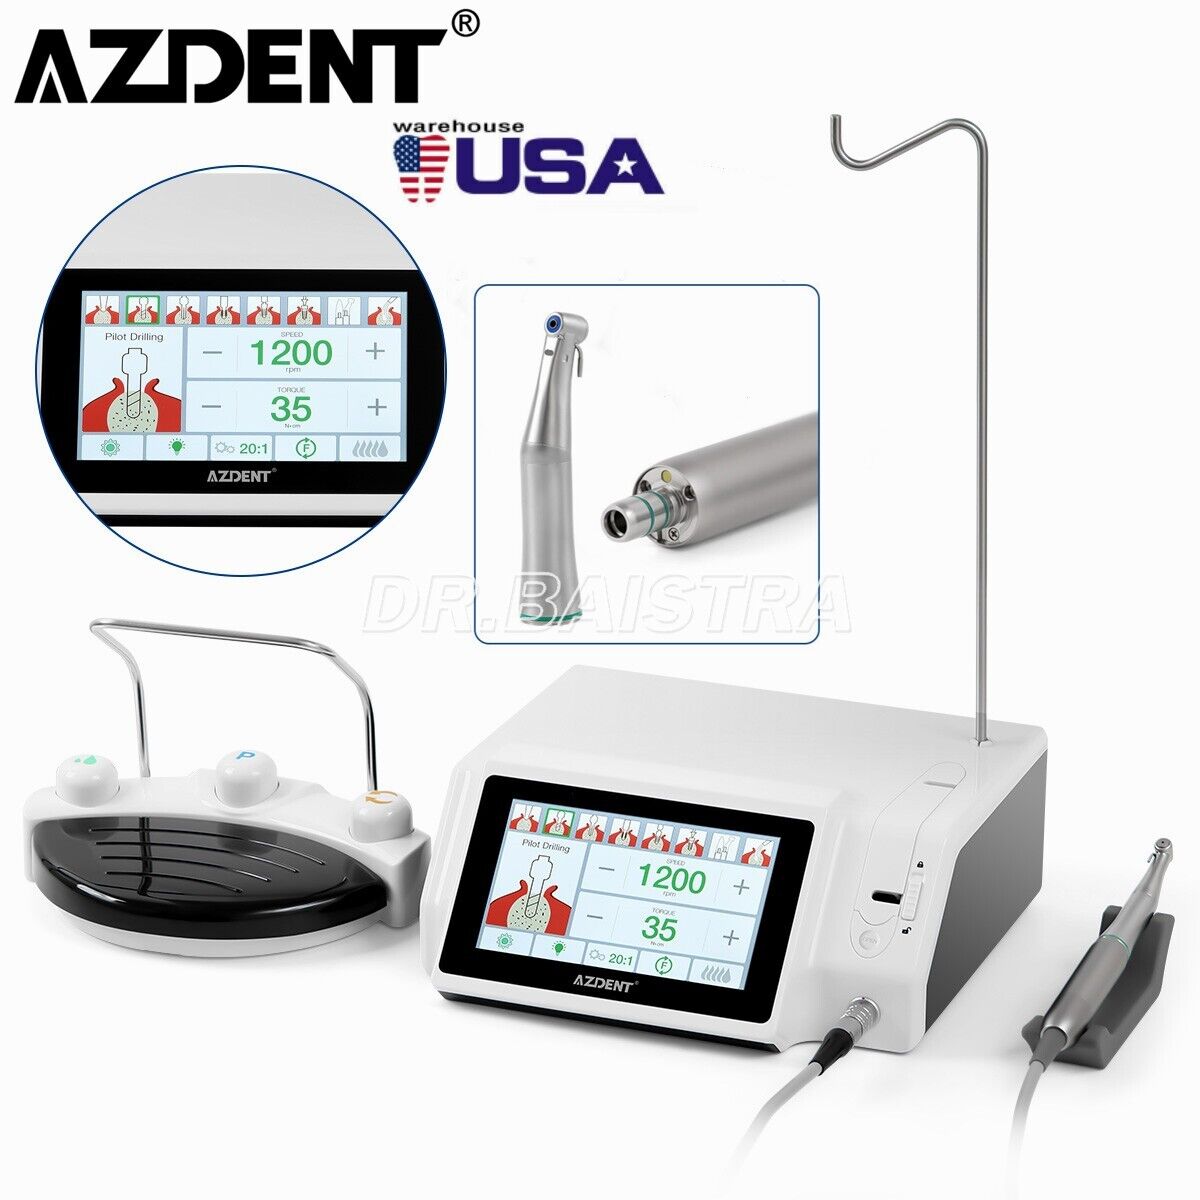 US Dental LED Implant Motor Surgical System Touch Screen+Contra Angle AZDENT